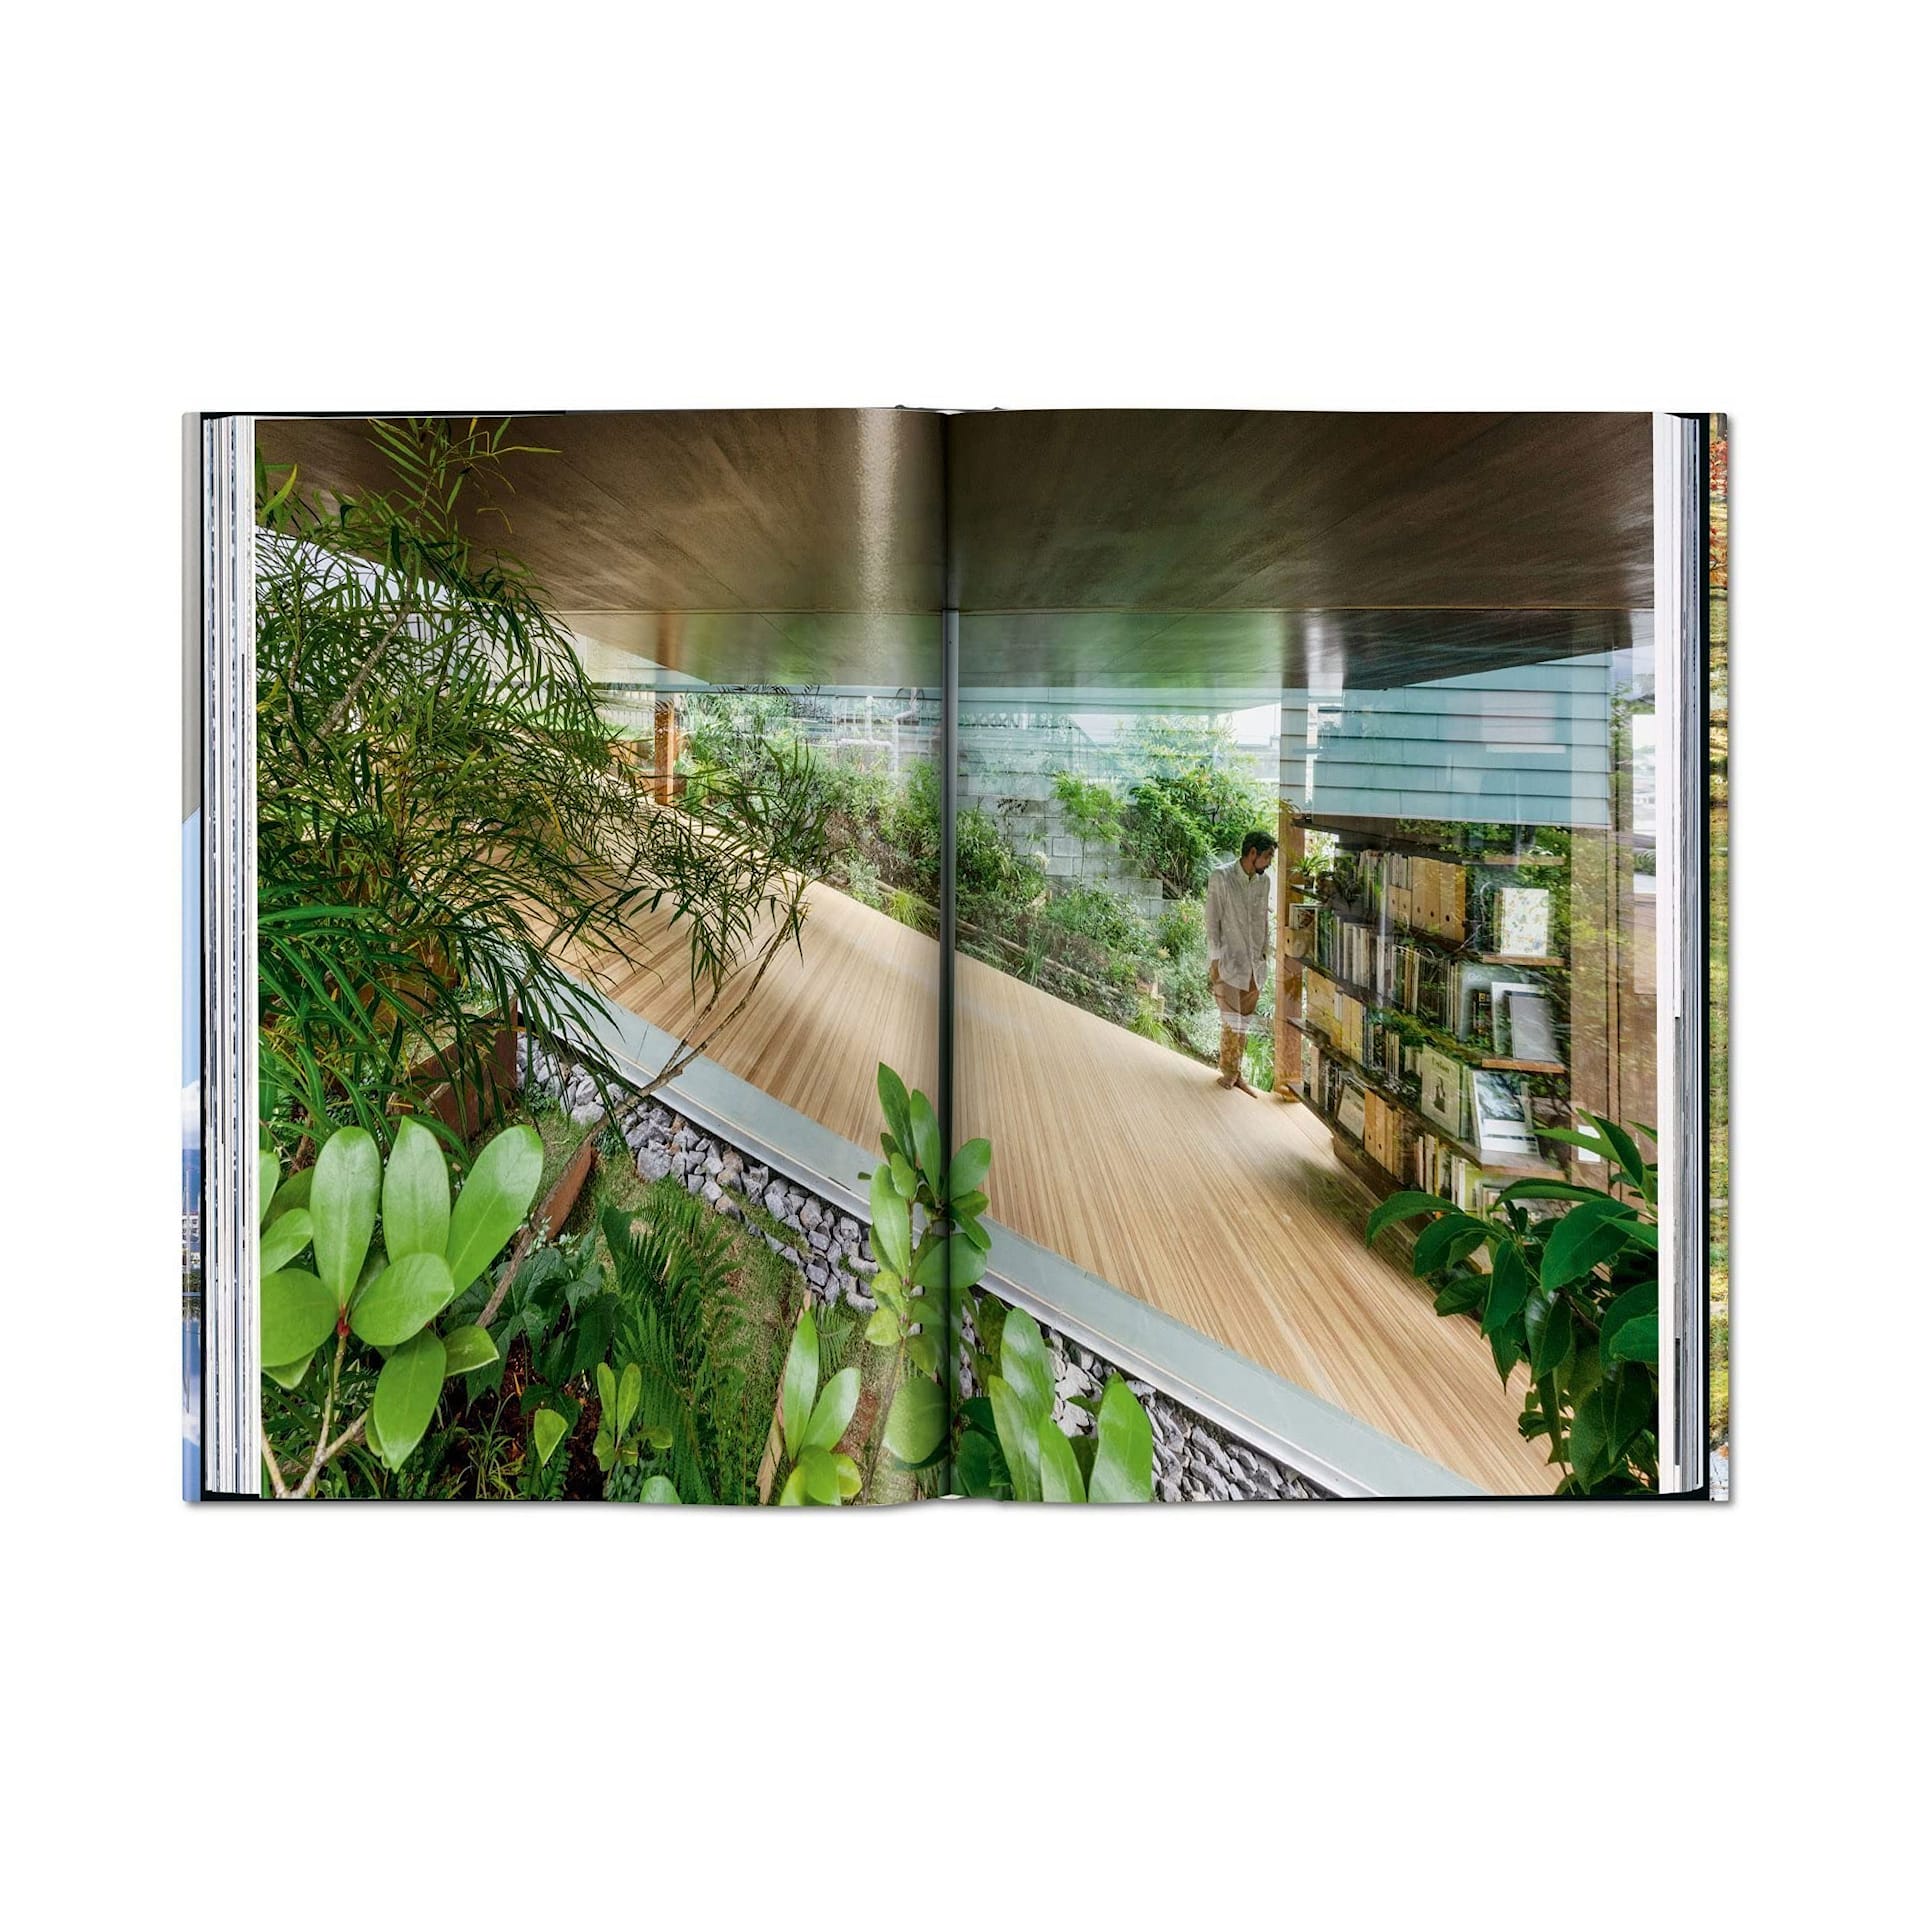 Contemporary Japanese Architecture - New Mags - NO GA